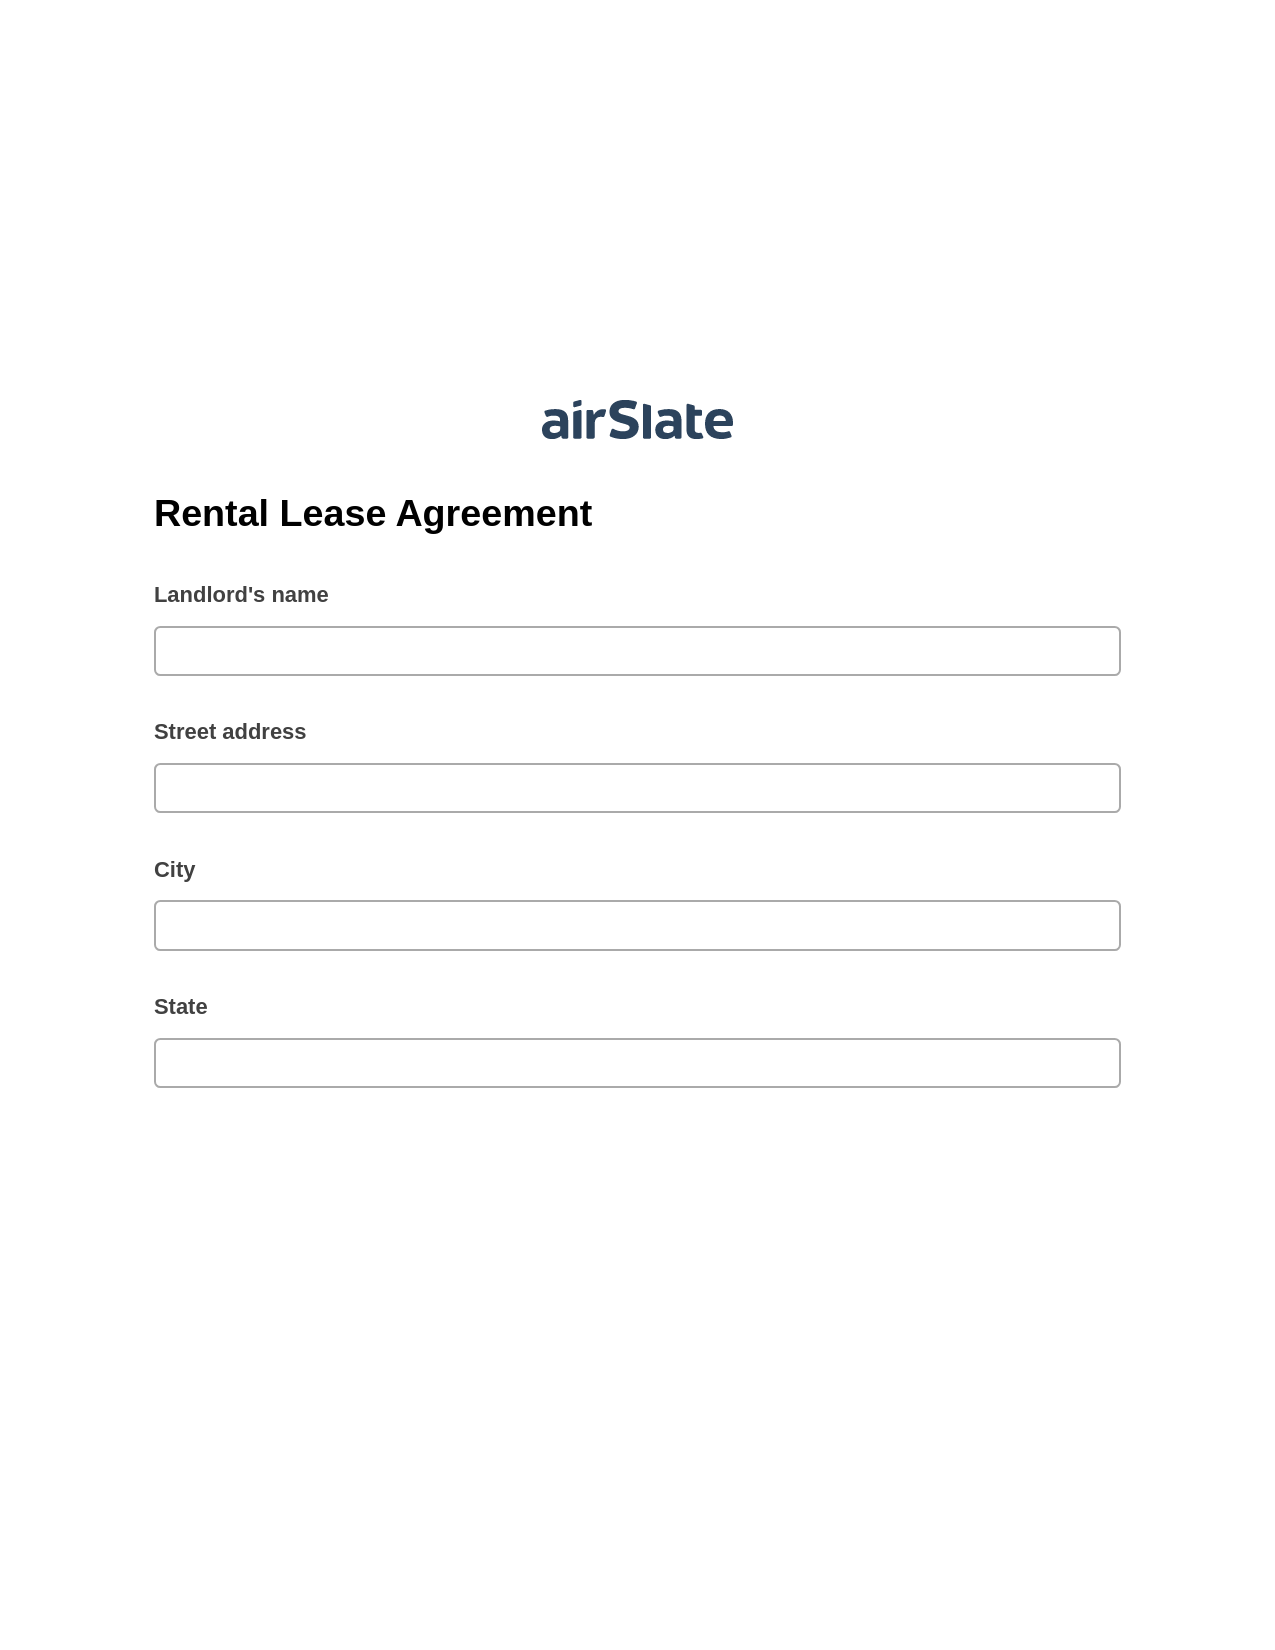 Rental Lease Agreement Pre-fill from Salesforce Records with SOQL Bot, System Bot - Create a Slate in another Flow, Post-finish Document Bot